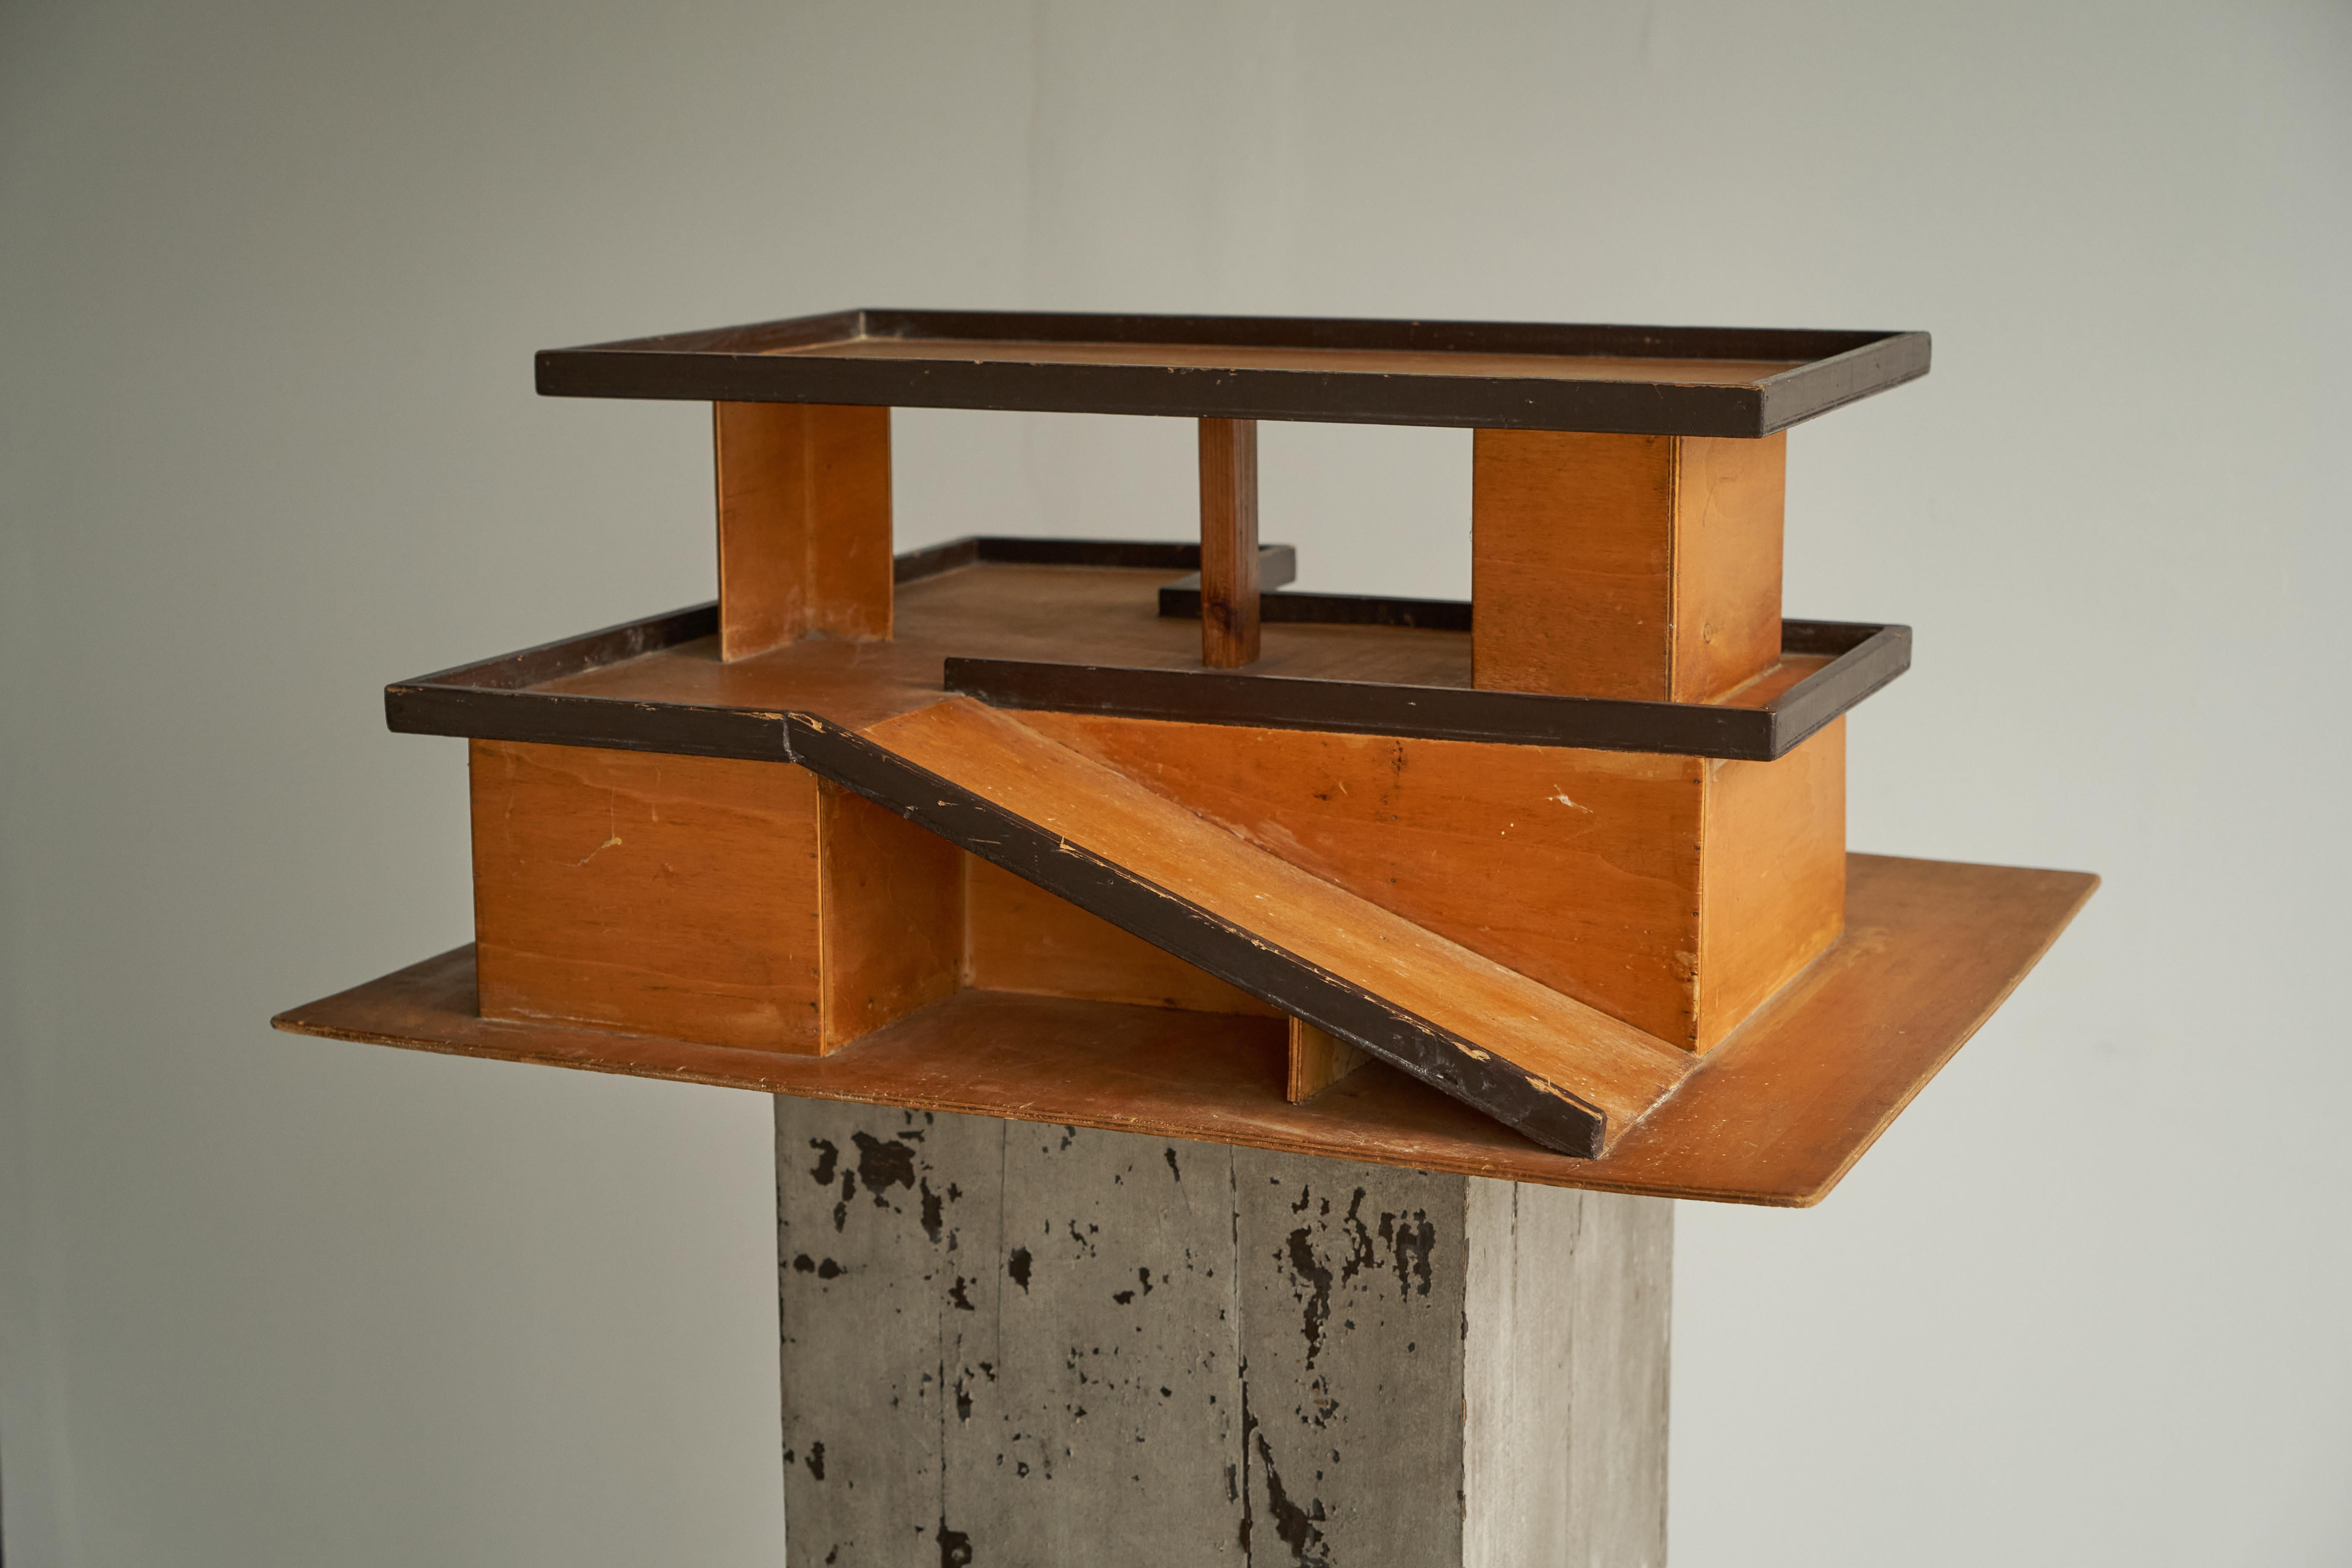 Modernist Architectural Model in Stained Plywood, presumably Dutch, 1950s.

This highly tasteful 1950s Modernist architectural model is well crafted in stained plywood and solid wood. It shows the design work of a truly skilled architect, to be seen